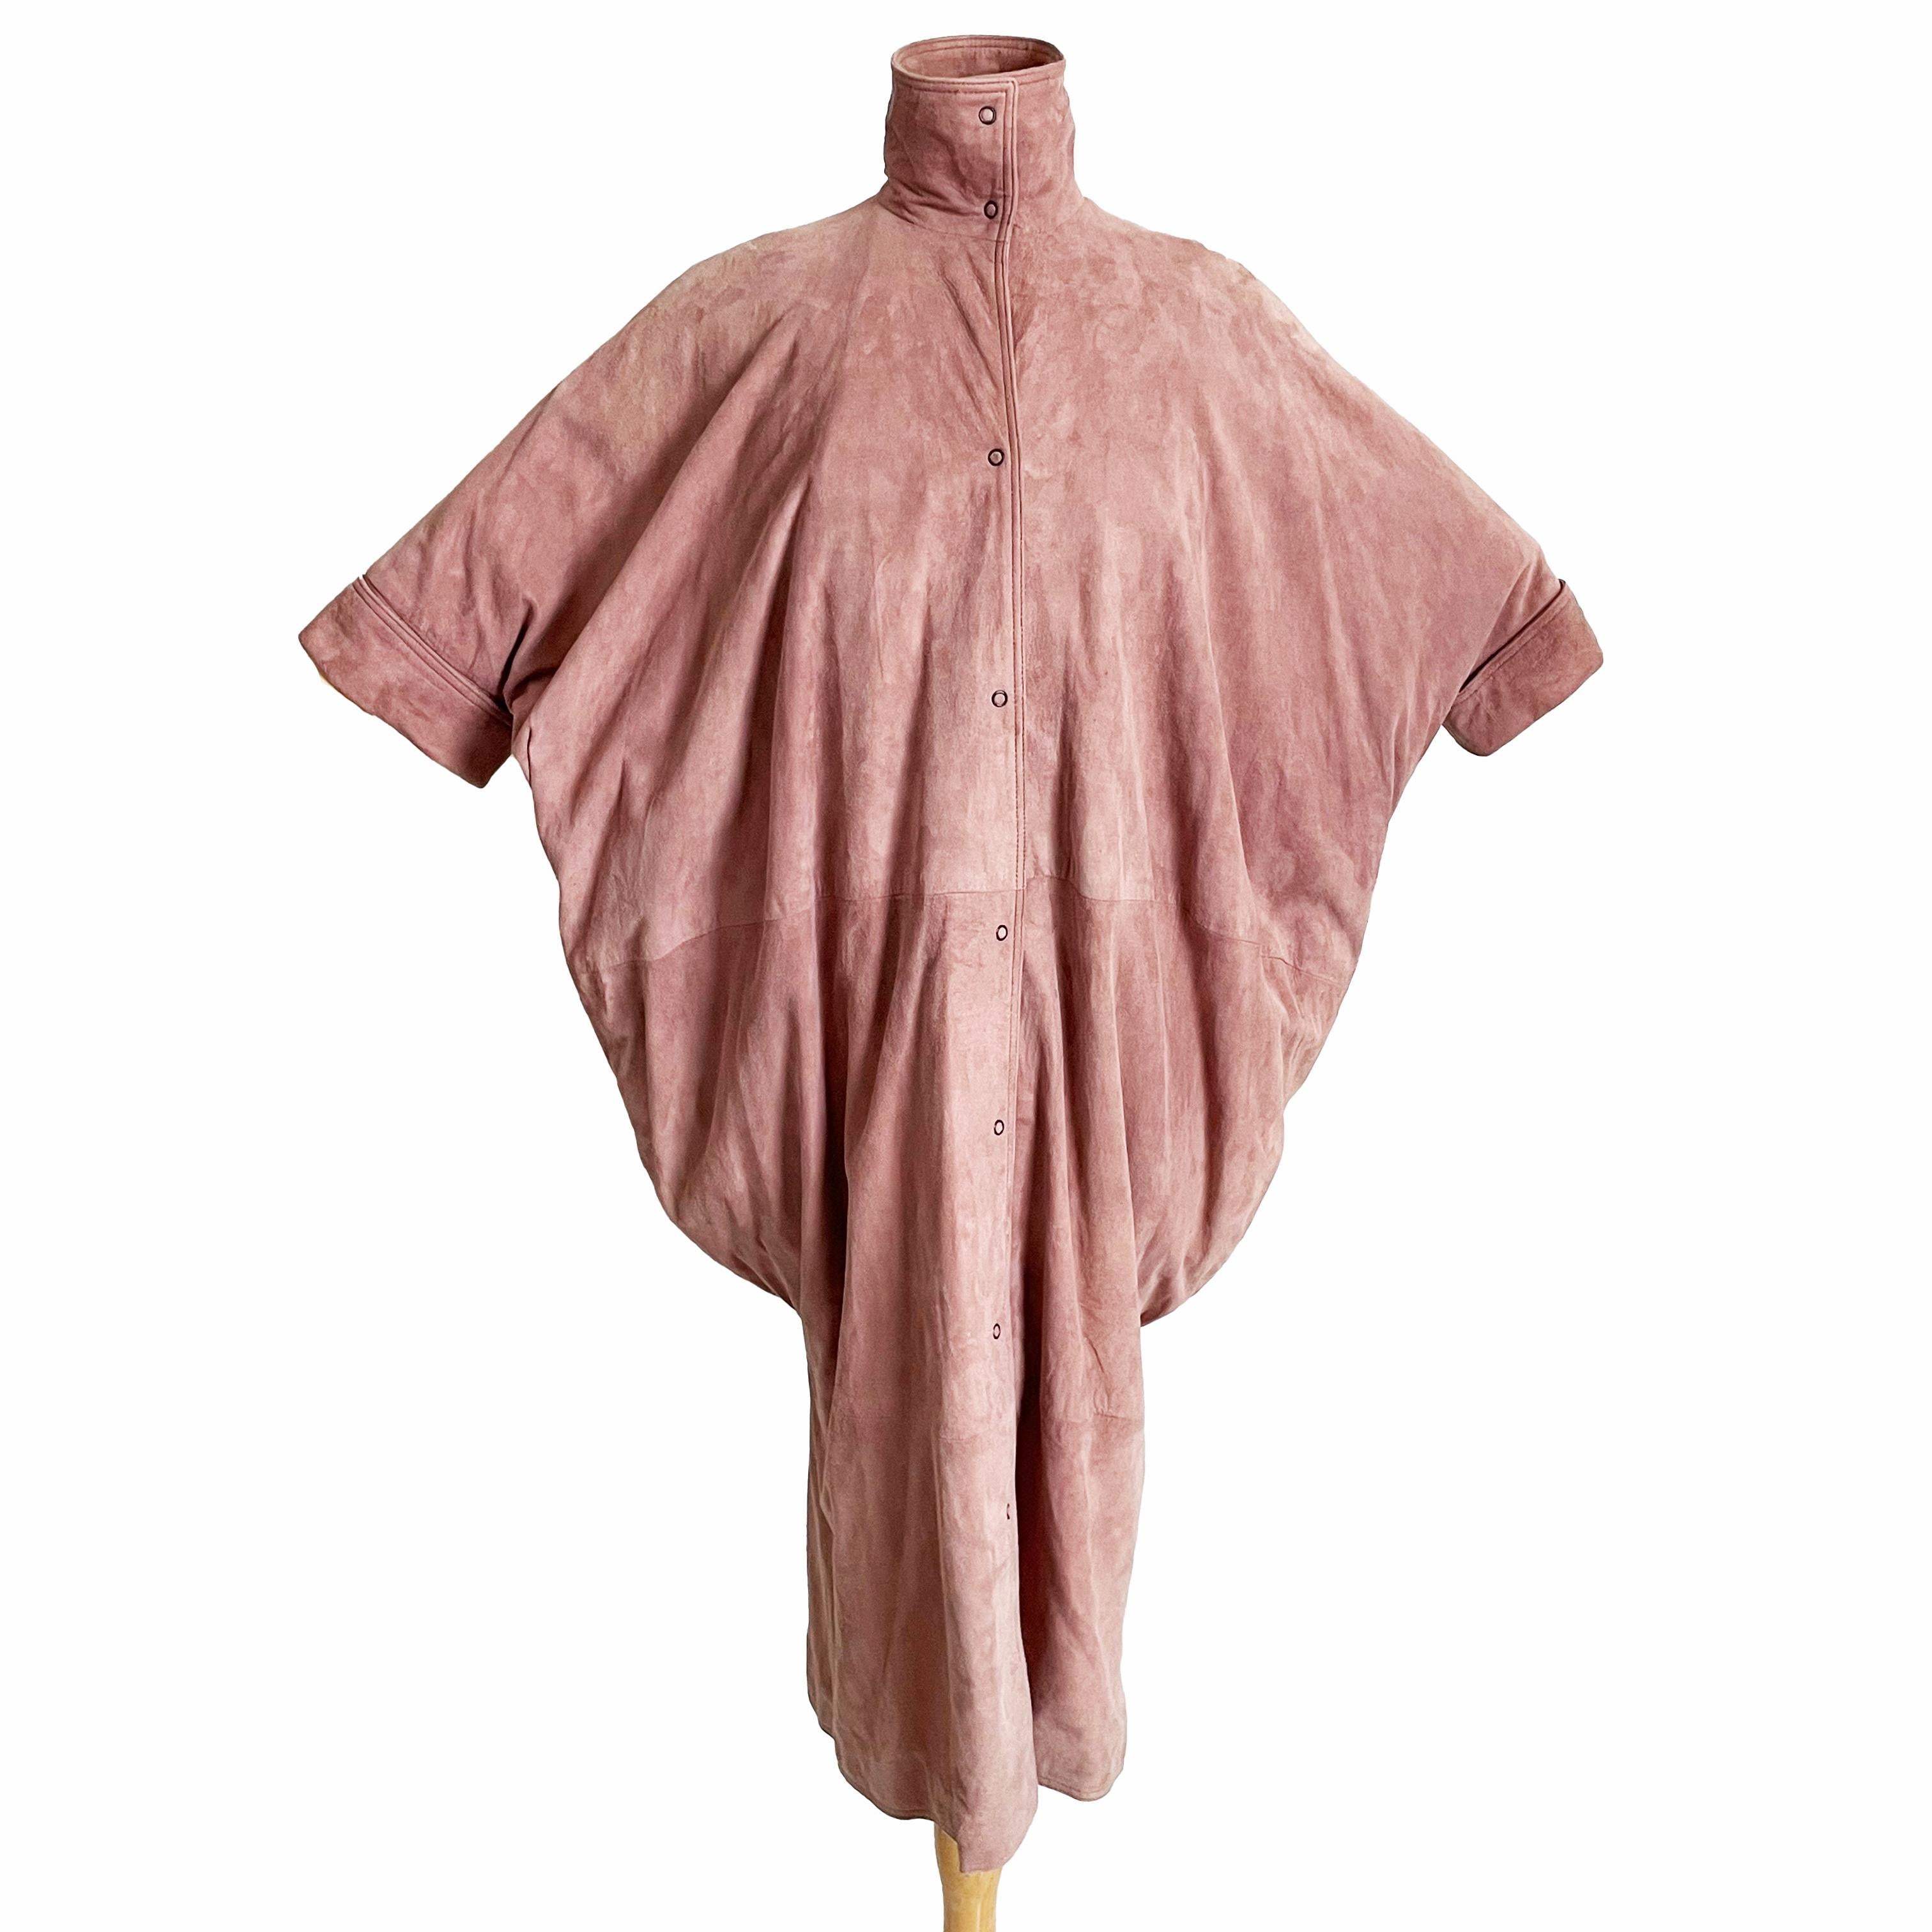 Authentic, preowned, vintage Fendi batwing duster jacket, likely designed by Karl Lagerfeld in the 1980s.  Note that we've included a sketch by Karl Lagerfeld (see last image), who worked for Fendi for some 50+ years between the 60s and 90s, and